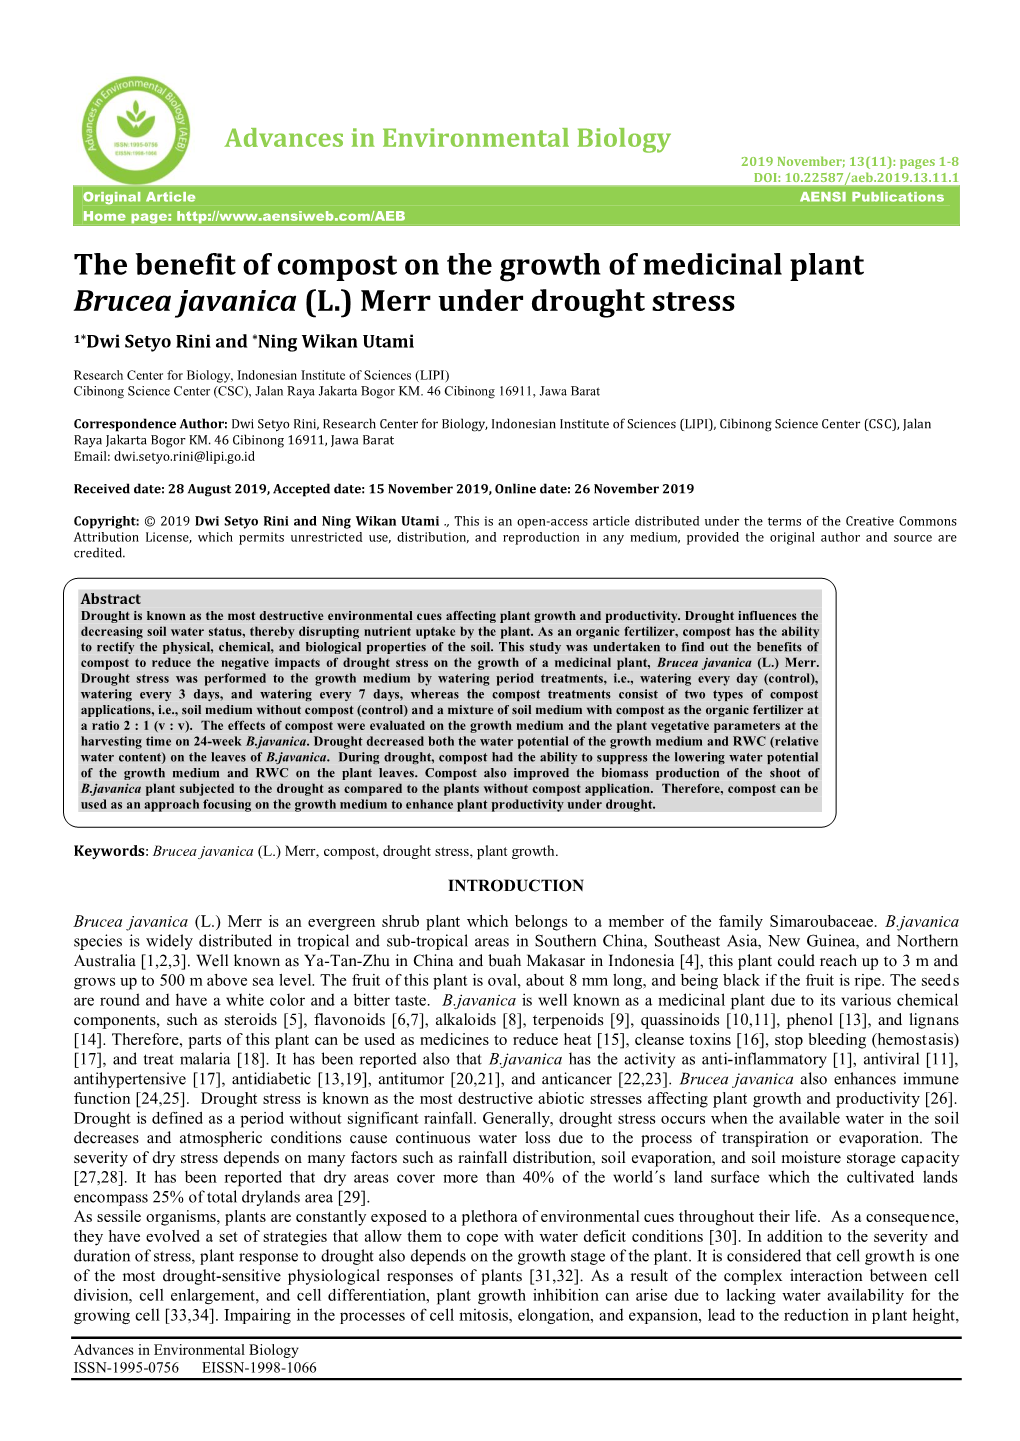 The Benefit of Compost on the Growth of Medicinal Plant Brucea Javanica (L.) Merr Under Drought Stress